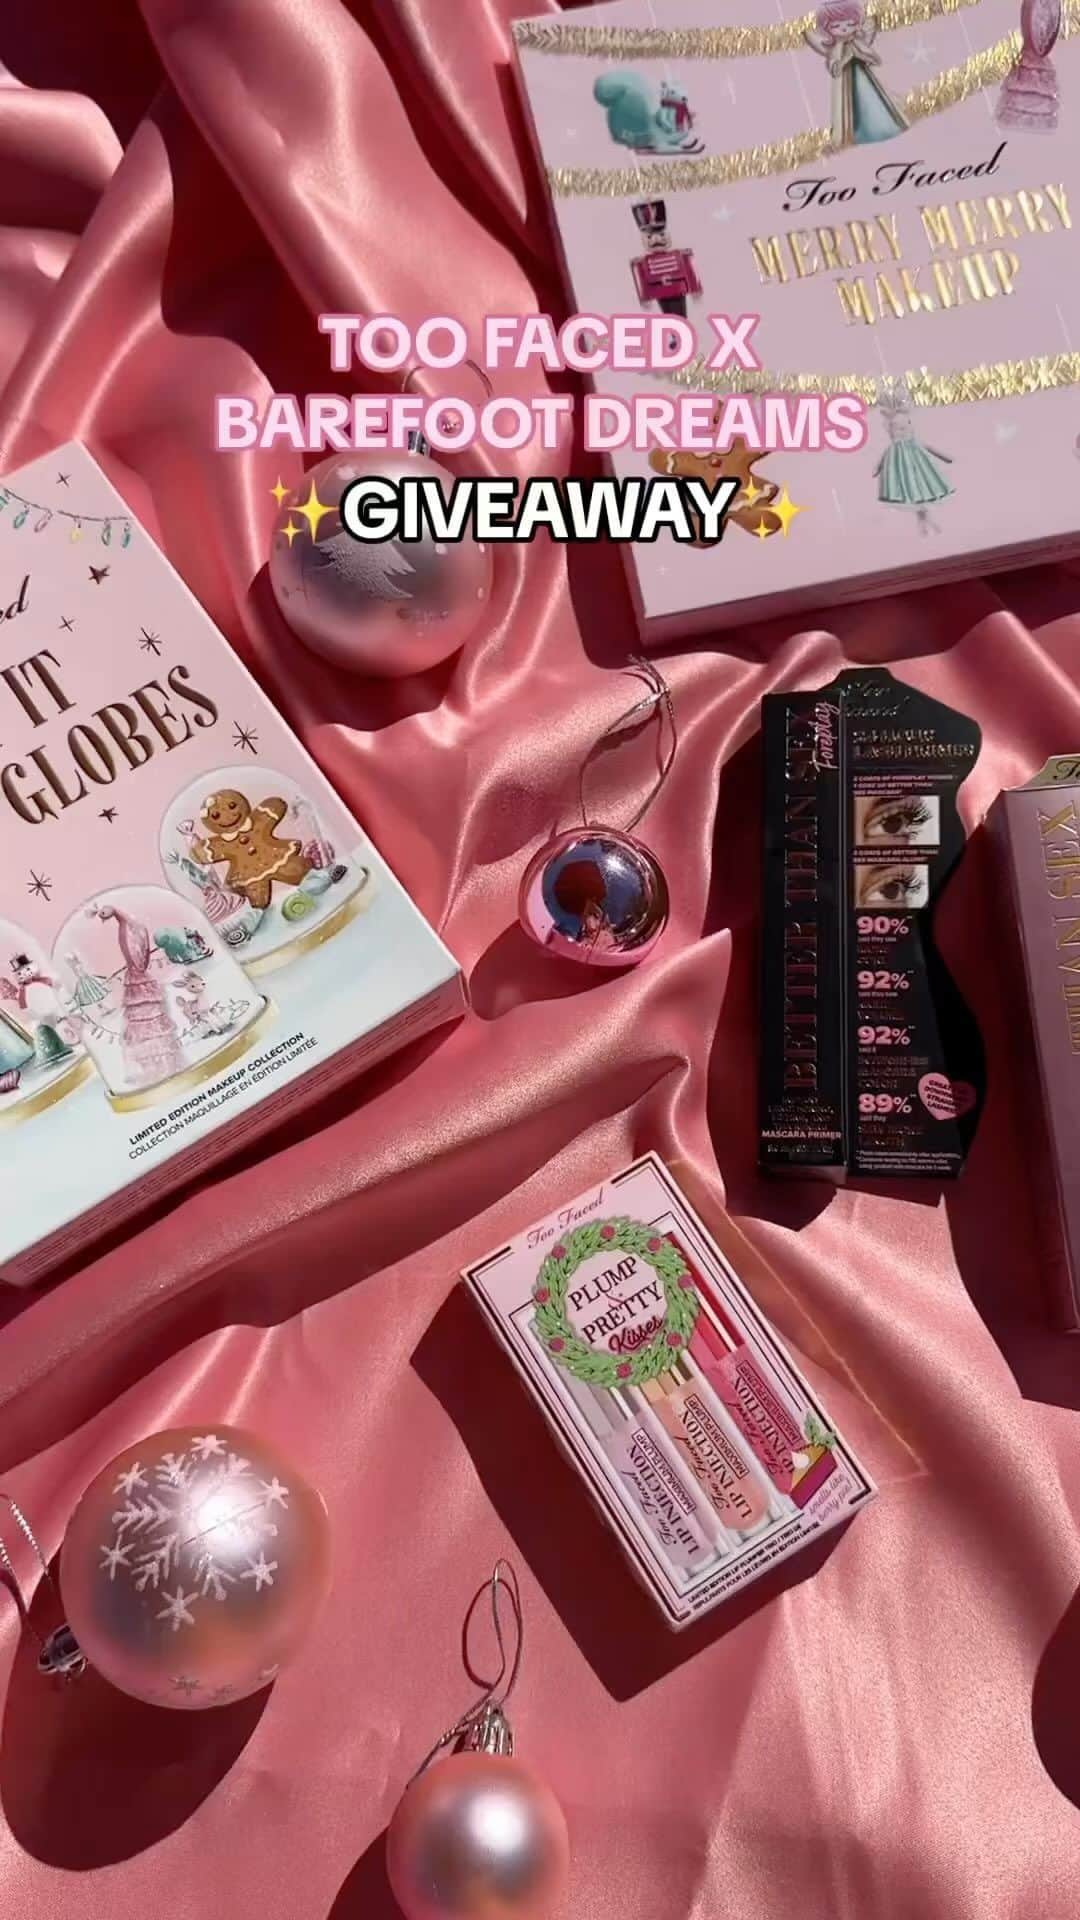 Too Facedのインスタグラム：「🎄💖 GIVEAWAY 💖🎄 We’re so excited to partner with @barefootdreams to give 2 lucky babes the ultimate holiday prize pack!   Prize Pack Includes: @toofaced Let It Snow Globes Makeup Collection, Better Than Sex Mascara in Black, Better Than Sex Foreplay Mascara Primer, Pillow Balm Warm & Spicy Trio Set, Plump & Pretty Kisses Lip Plumper Set, and Merry Merry Makeup Face & Eye Palette Gift Set and @barefootdreams CozyChic Robe in shade Cream and CozyChic 3 Pair Sock Set in shade Fig Multi!   HOW TO ENTER: ✨ Like & Save This Post ✨ Follow @toofaced and @barefootdreams  ✨ Tag 2 of your besties (they must be following too!) ✨ For additional entries, comment a 💖 on both of our most recent posts!  (US & INT) Giveaway ends 11/19 at 11:59 PM PST & the winners will be chosen on 11/20 via DM by the official @toofaced and @barefootdreams accounts! Terms & Conditions on toofaced.com GOOD LUCK! 💖 #toofaced #tfcrueltyfree」